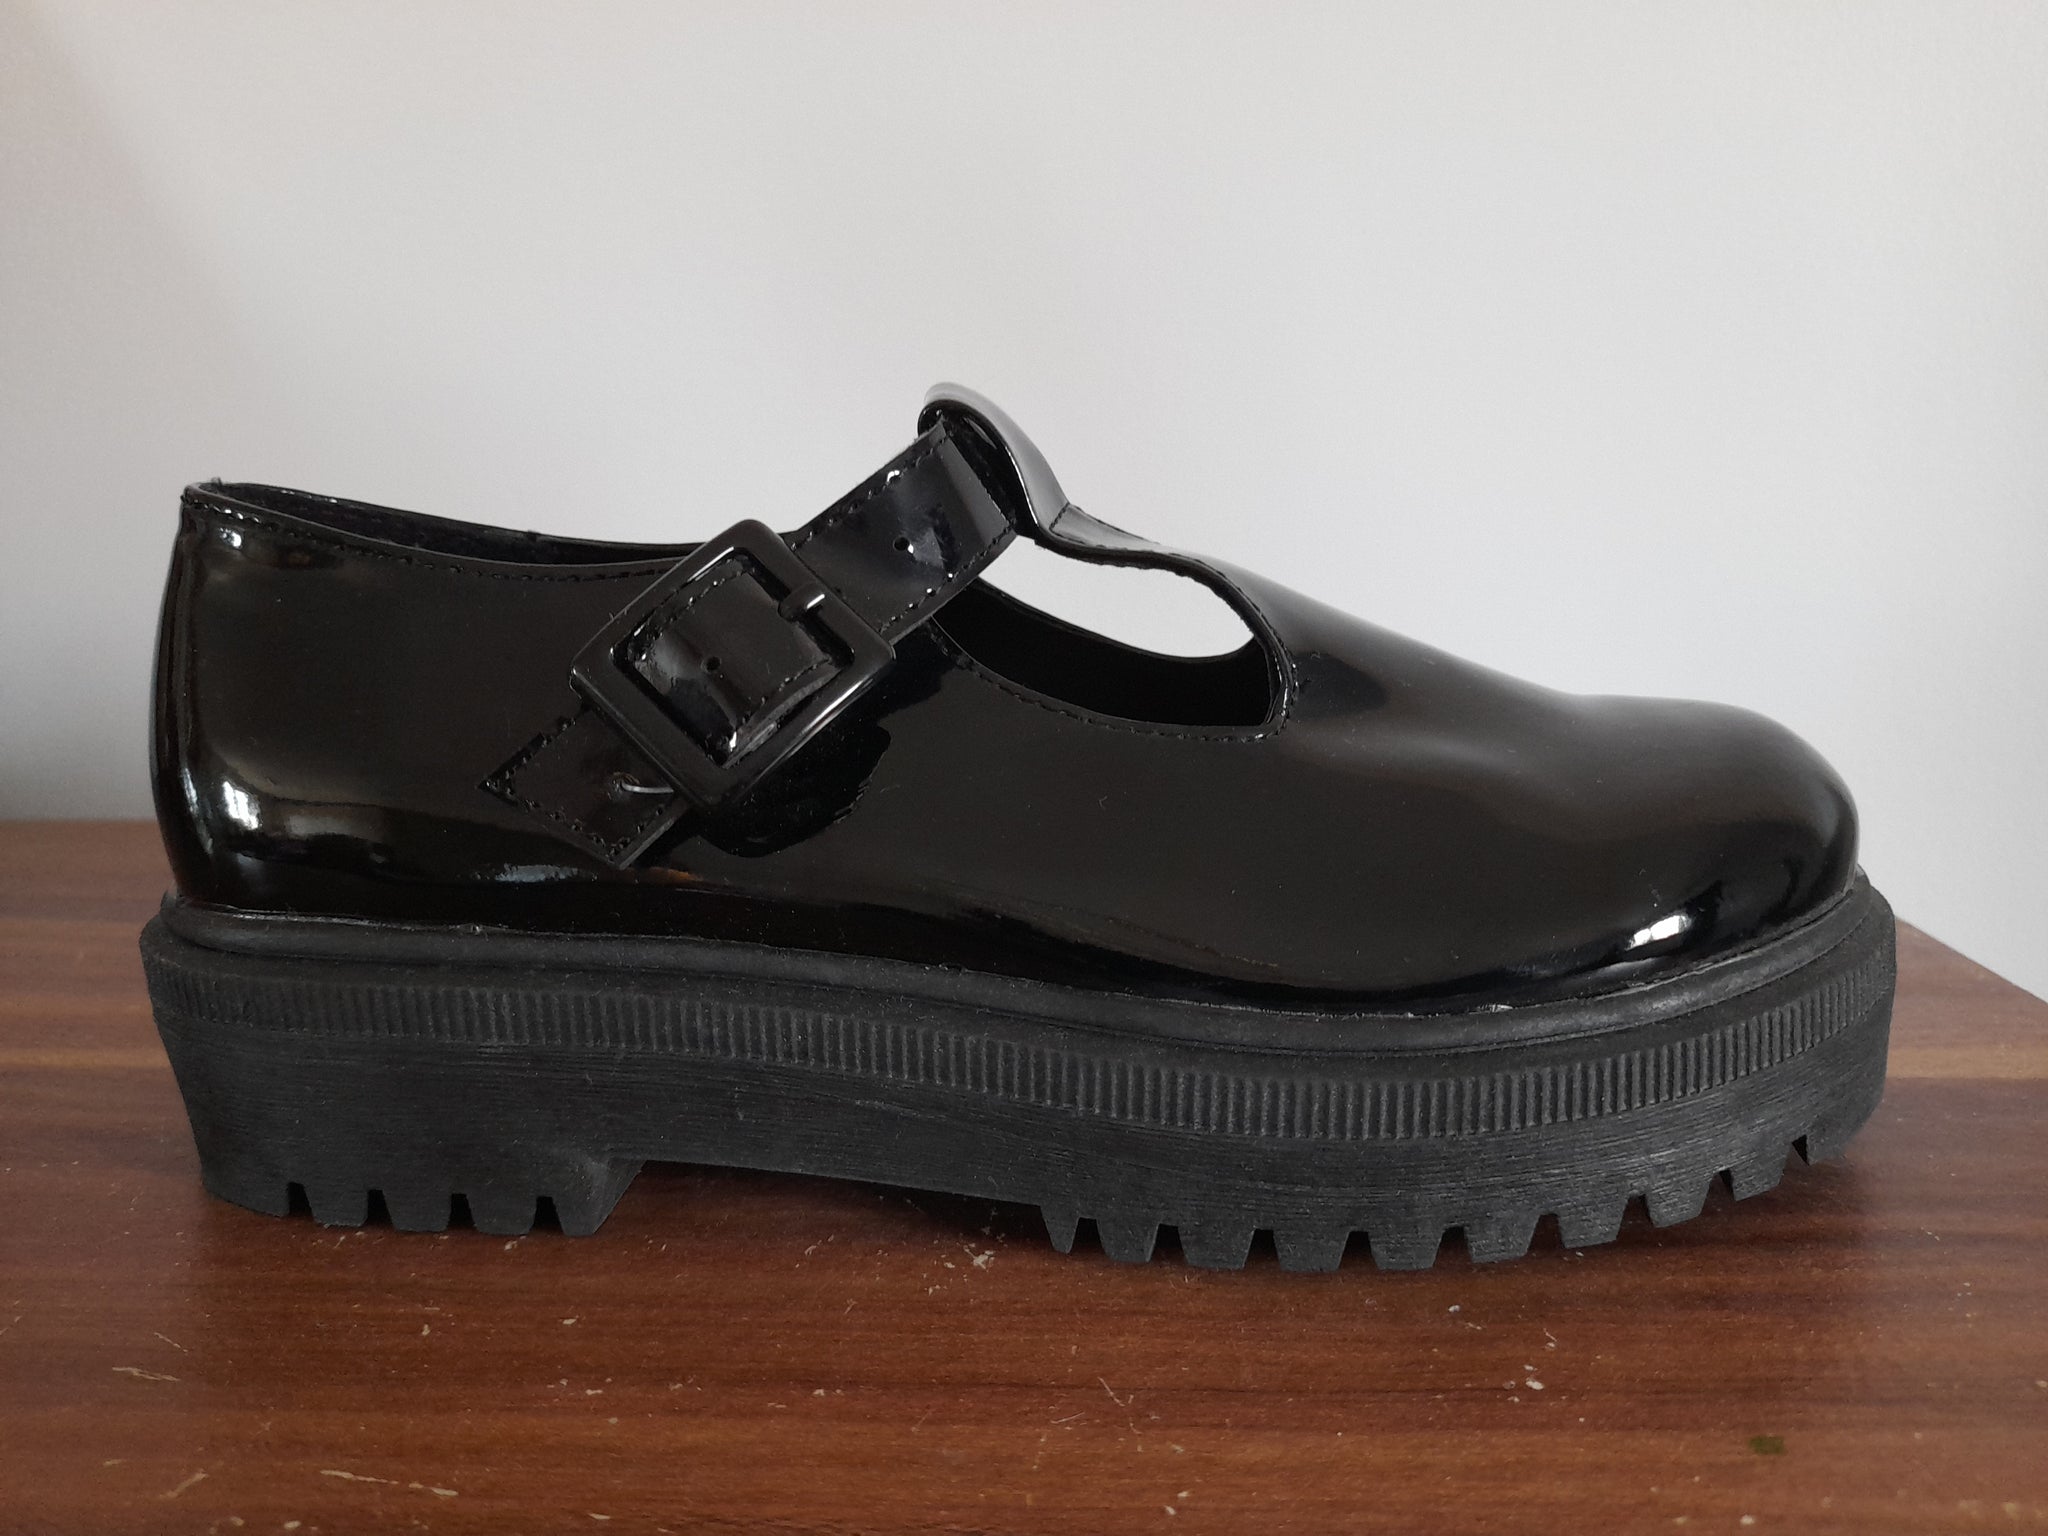 F&F Black Patent Chunky Girls School Shoes - Stockpoint Apparel Outlet